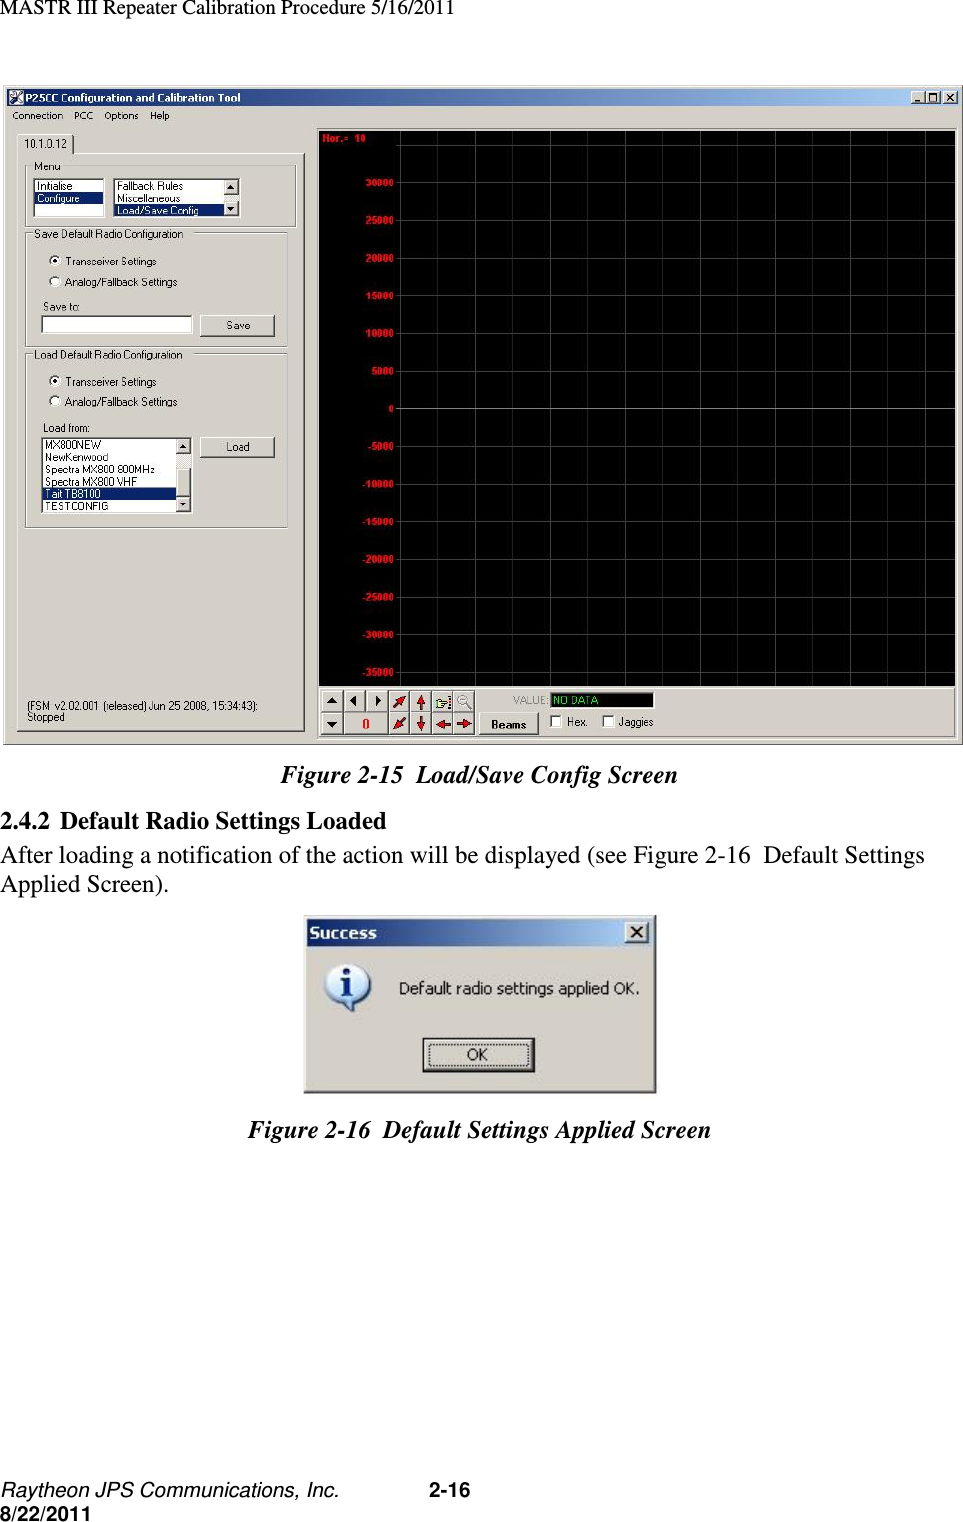 MASTR III Repeater Calibration Procedure 5/16/2011 Raytheon JPS Communications, Inc. 2-16 8/22/2011  Figure 2-15  Load/Save Config Screen 2.4.2 Default Radio Settings Loaded After loading a notification of the action will be displayed (see Figure 2-16  Default Settings Applied Screen).  Figure 2-16  Default Settings Applied Screen 